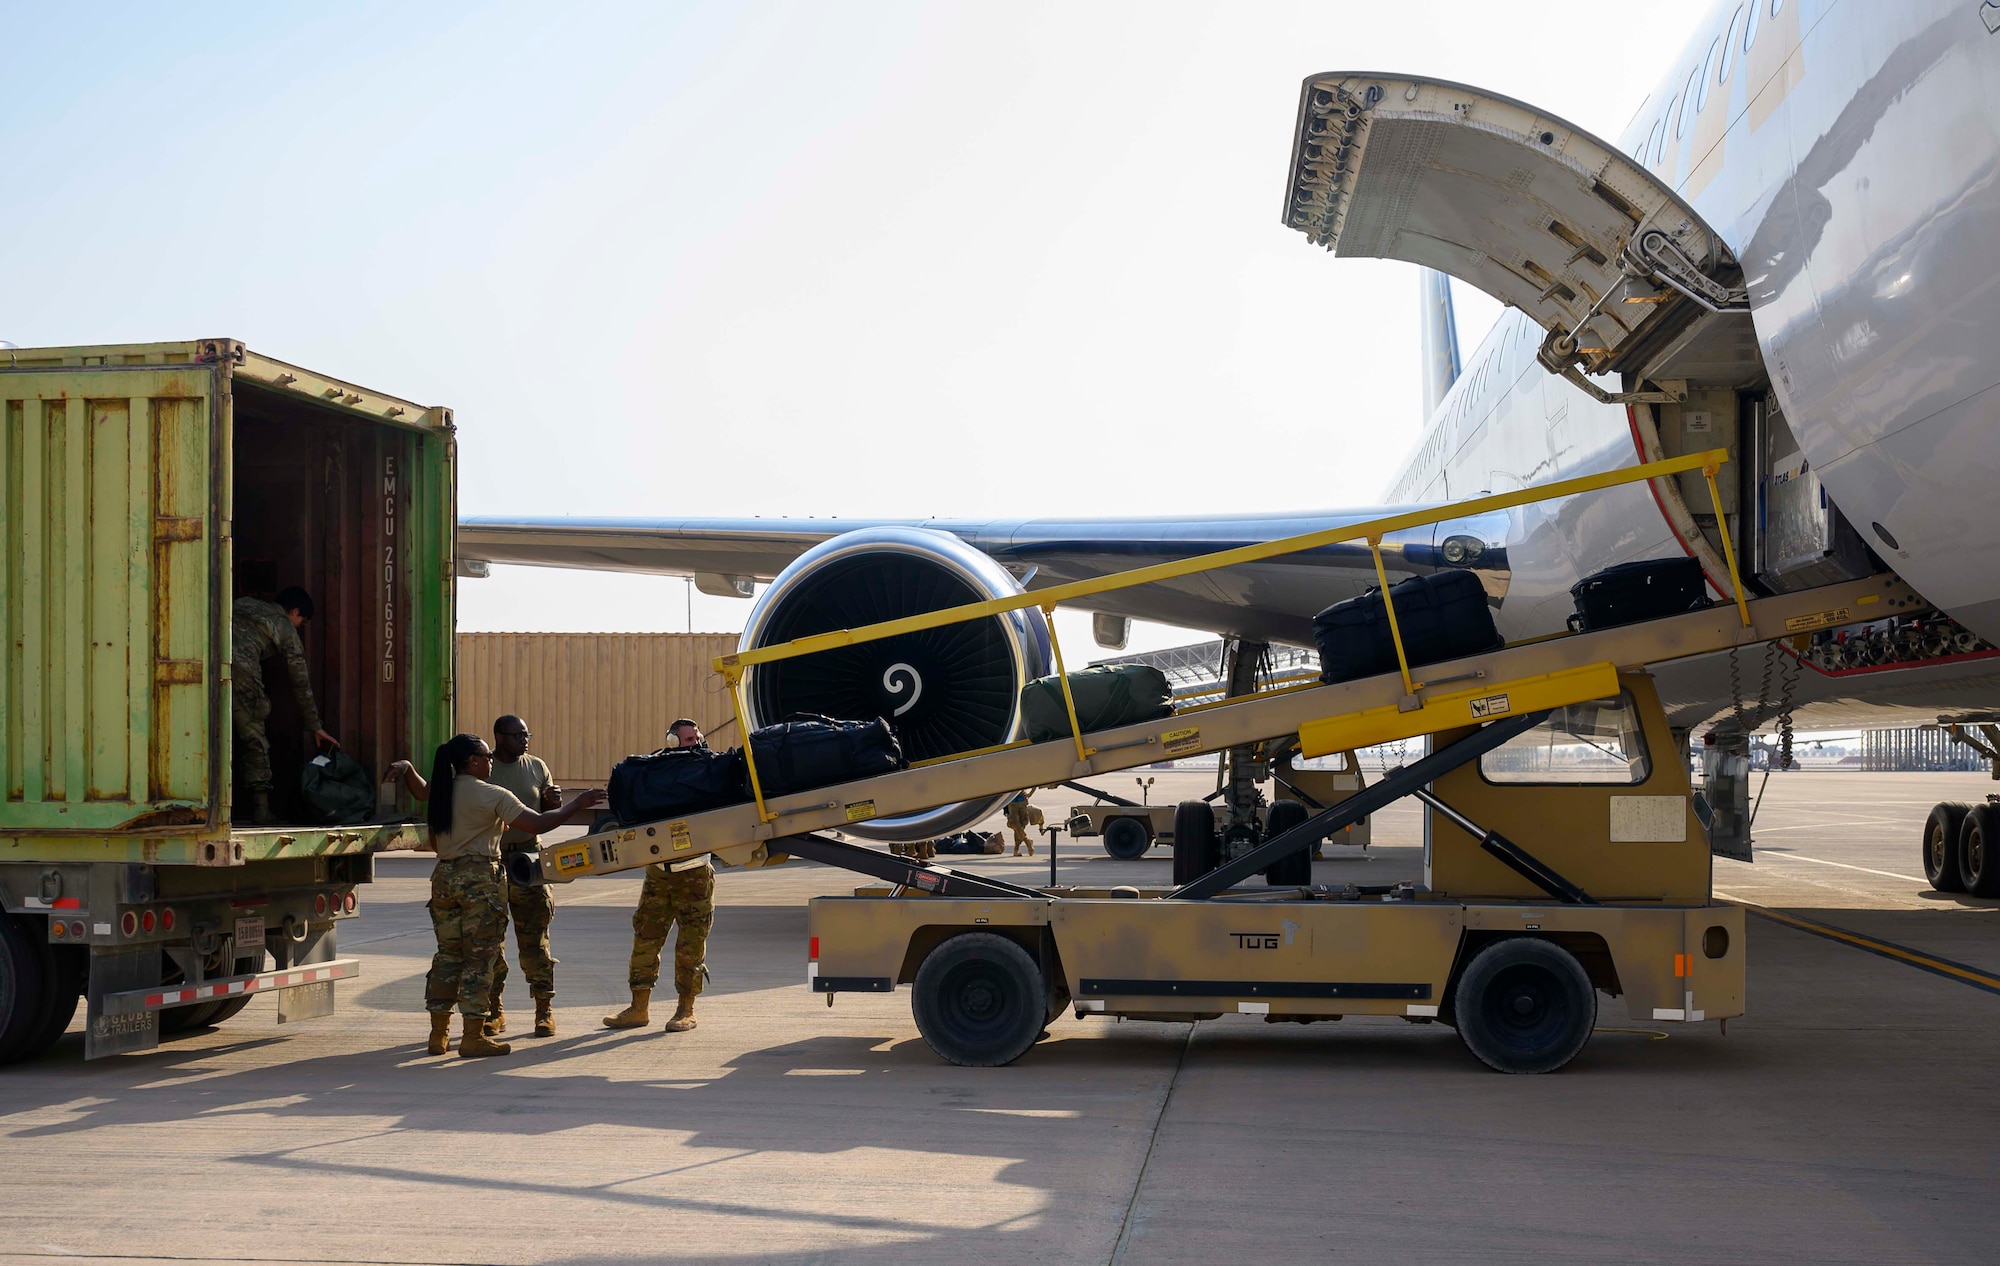 Airmen from the District of Columbia Air National Guard’s 113th Wing, known as the “Capital Guardians,” unload luggage after arriving at Prince Sultan Air Base, Kingdom of Saudi Arabia, July 11, 2021. The wing deployed a contingent of U.S. Air Force F-16 Fighting Falcons to PSAB to reinforce the base’s defensive capabilities, provide operational depth, and support U.S. Central Command operations in the region. (U.S. Air Force Photo by Senior Airman Samuel Earick)